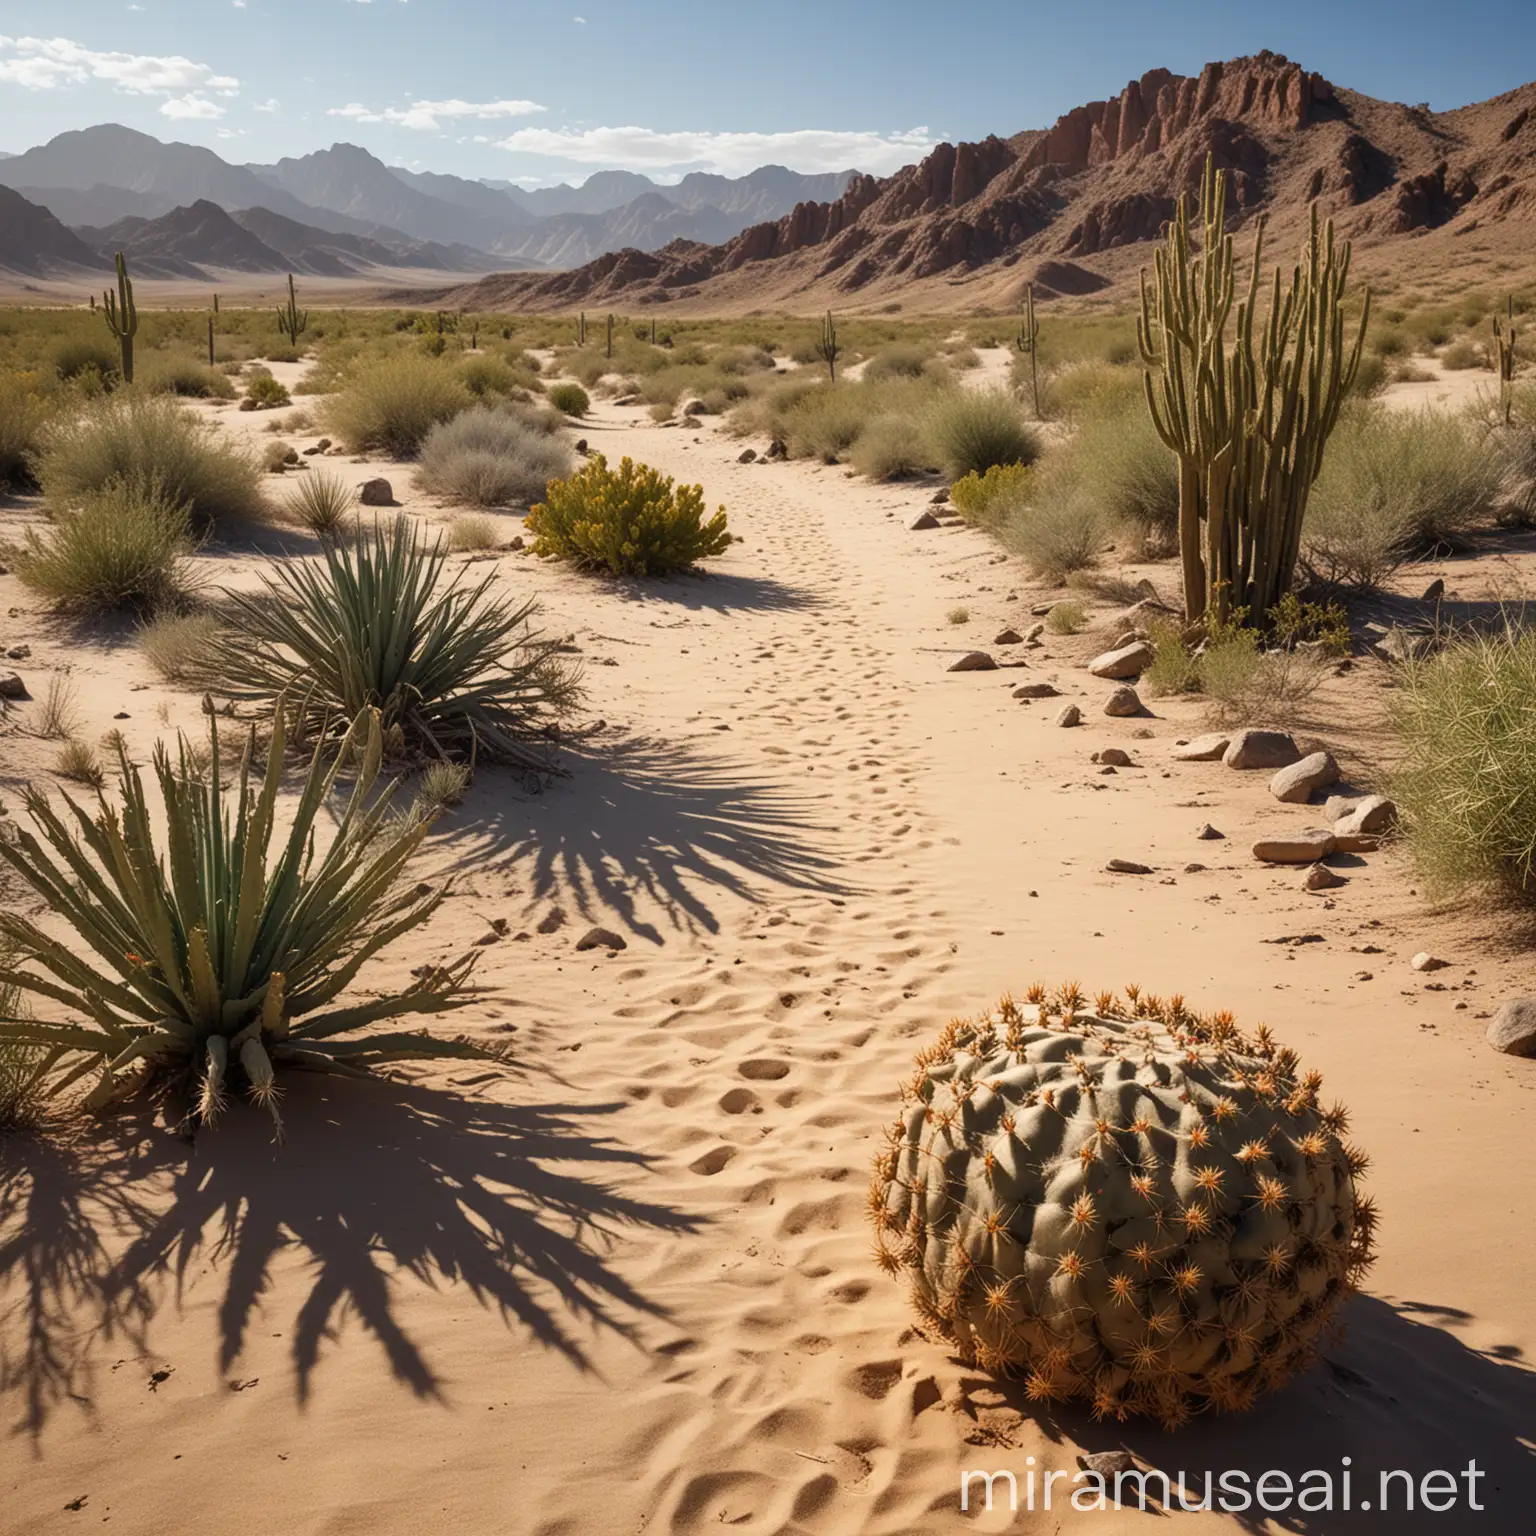 Create a high-resolution, 4-megapixel image of a charming desert landscape. The scene should depict a vast expanse of golden sand dunes under a clear blue sky. The sand should have a smooth, undulating texture with gentle ripples formed by the wind. Include a variety of cacti and desert plants, such as saguaros, ocotillos, and prickly pears, to add life and diversity to the landscape.  In the foreground, place a weathered wooden signpost with directions to nearby desert landmarks, giving a sense of exploration and adventure. A winding path should lead from the foreground into the distance, inviting the viewer to follow it through the dunes. Add a few scattered rocks and a dried-up riverbed to enhance the realism of the scene.  Ensure the lighting is warm and golden, as if capturing the desert during the late afternoon or early evening, casting long shadows and highlighting the textures of the sand and plants. In the background, include distant mountains with a slight haze to convey depth and scale. The overall atmosphere should be serene and inviting, capturing the quiet beauty and charm of the desert landscape.